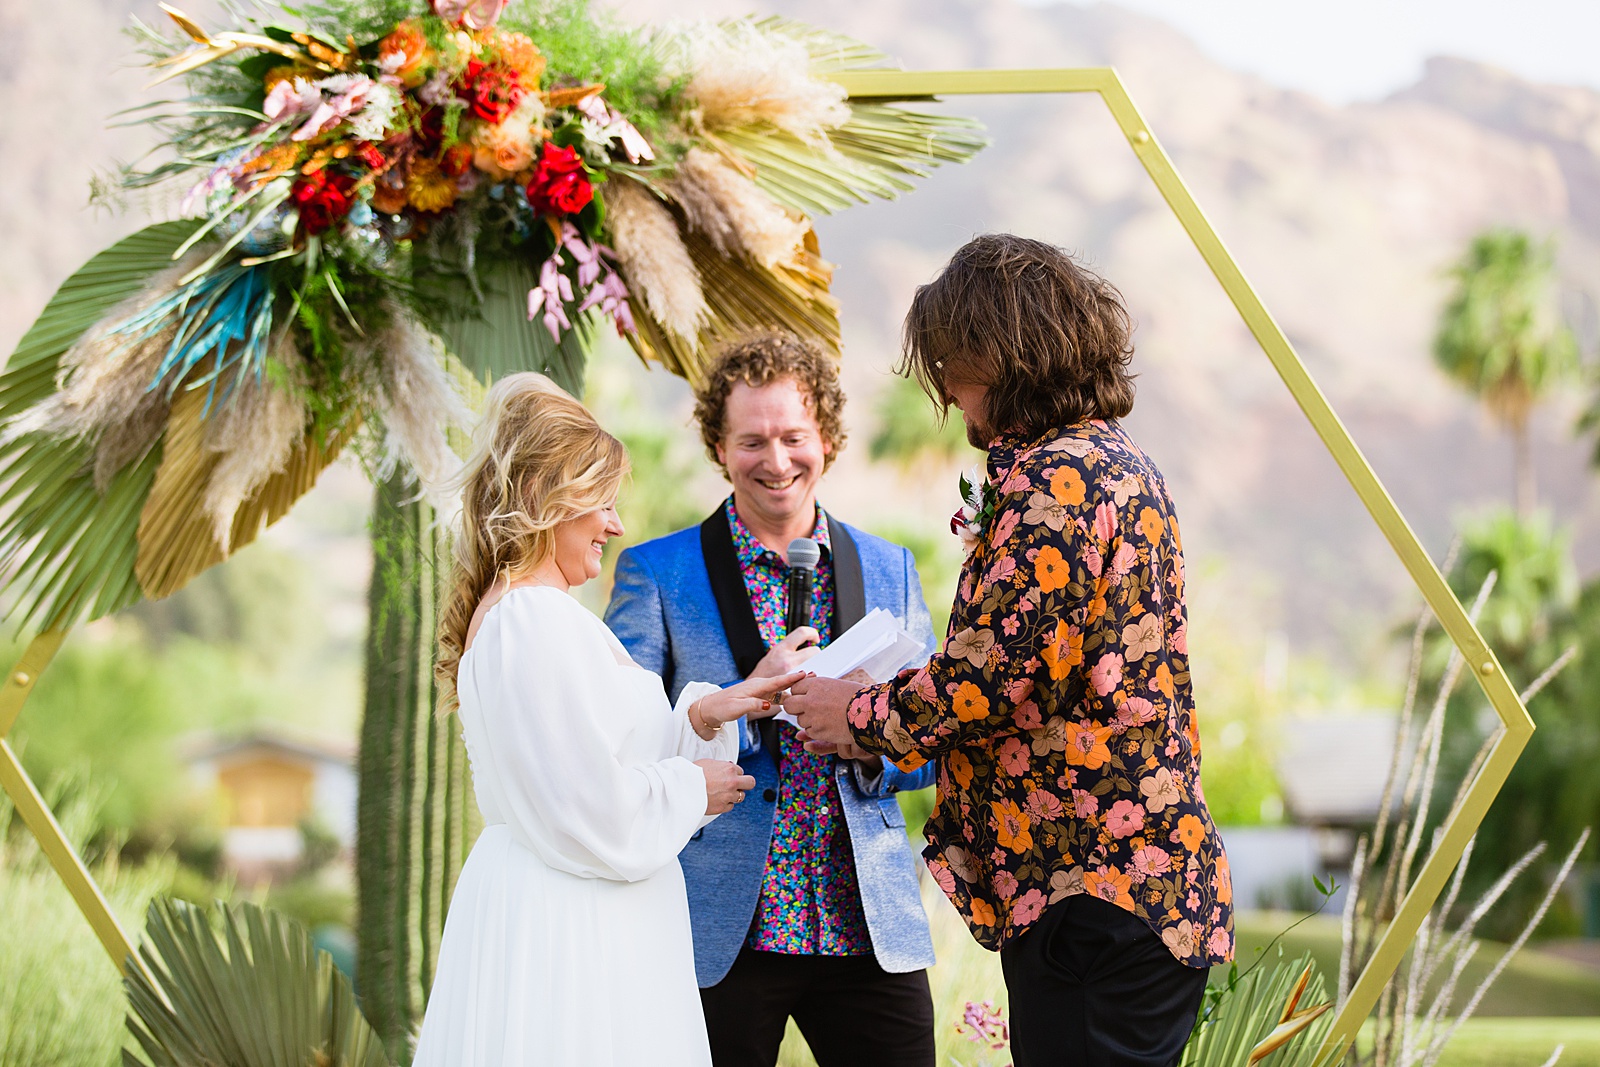 Bride and groom exchange vows during their Mountain Shadows Resort wedding ceremony by Paradise Valley wedding photographer PMA Photography.